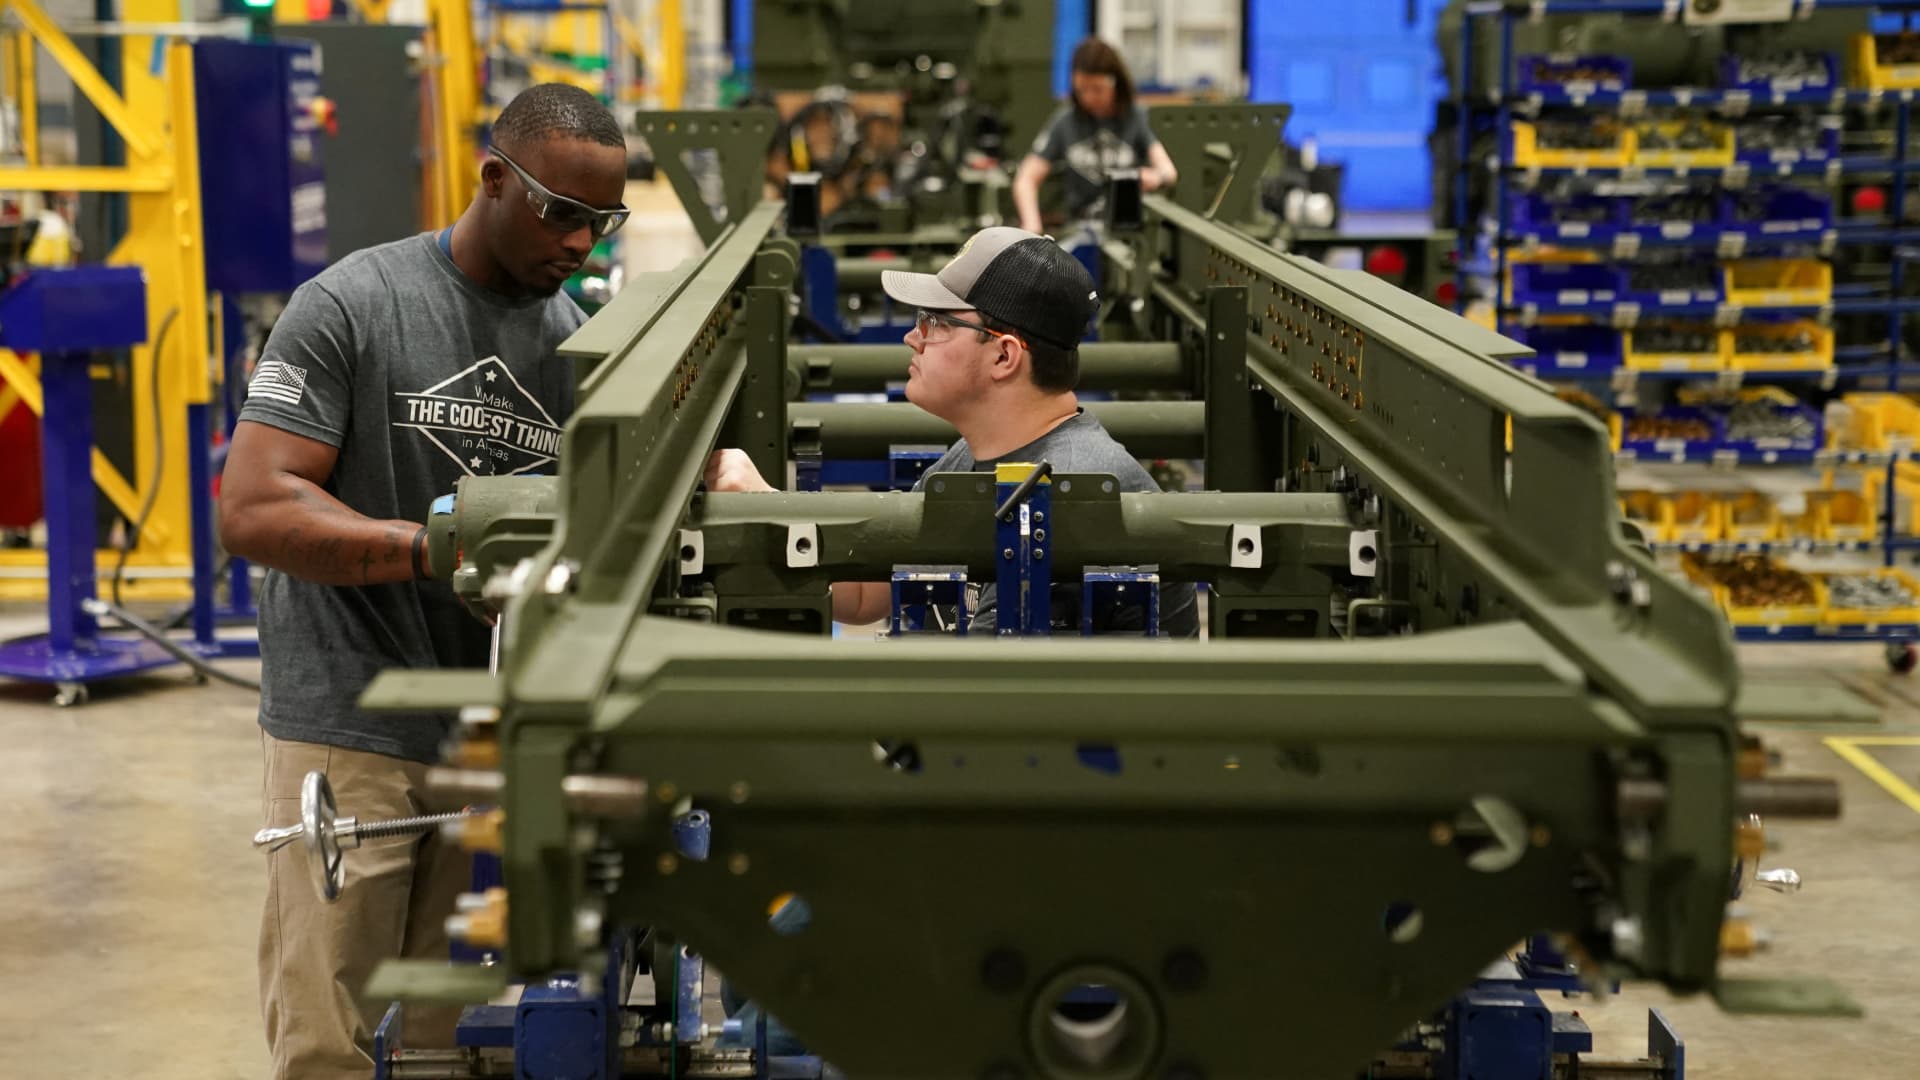 Technicians work on a HIMARS (High Mobility Artillery Rocket System) missile launcher chassis at Lockheed Martin Camden Operations in Camden, Arkansas, February 27, 2023.